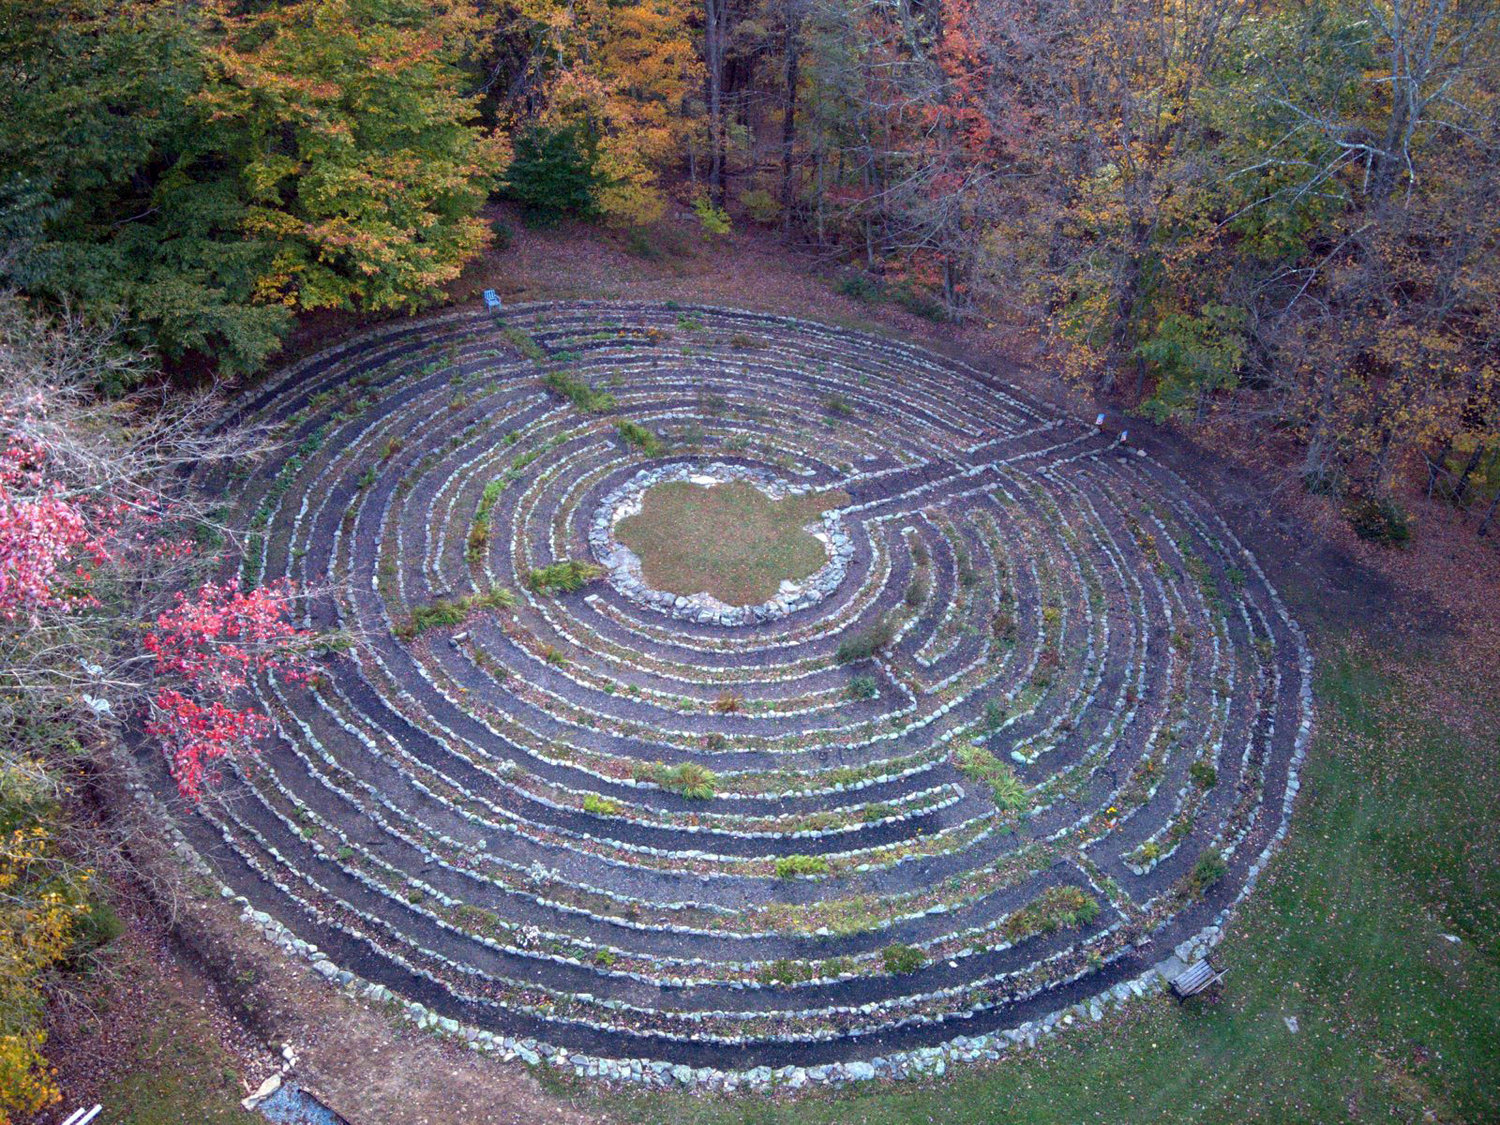 The labyrinth from above.